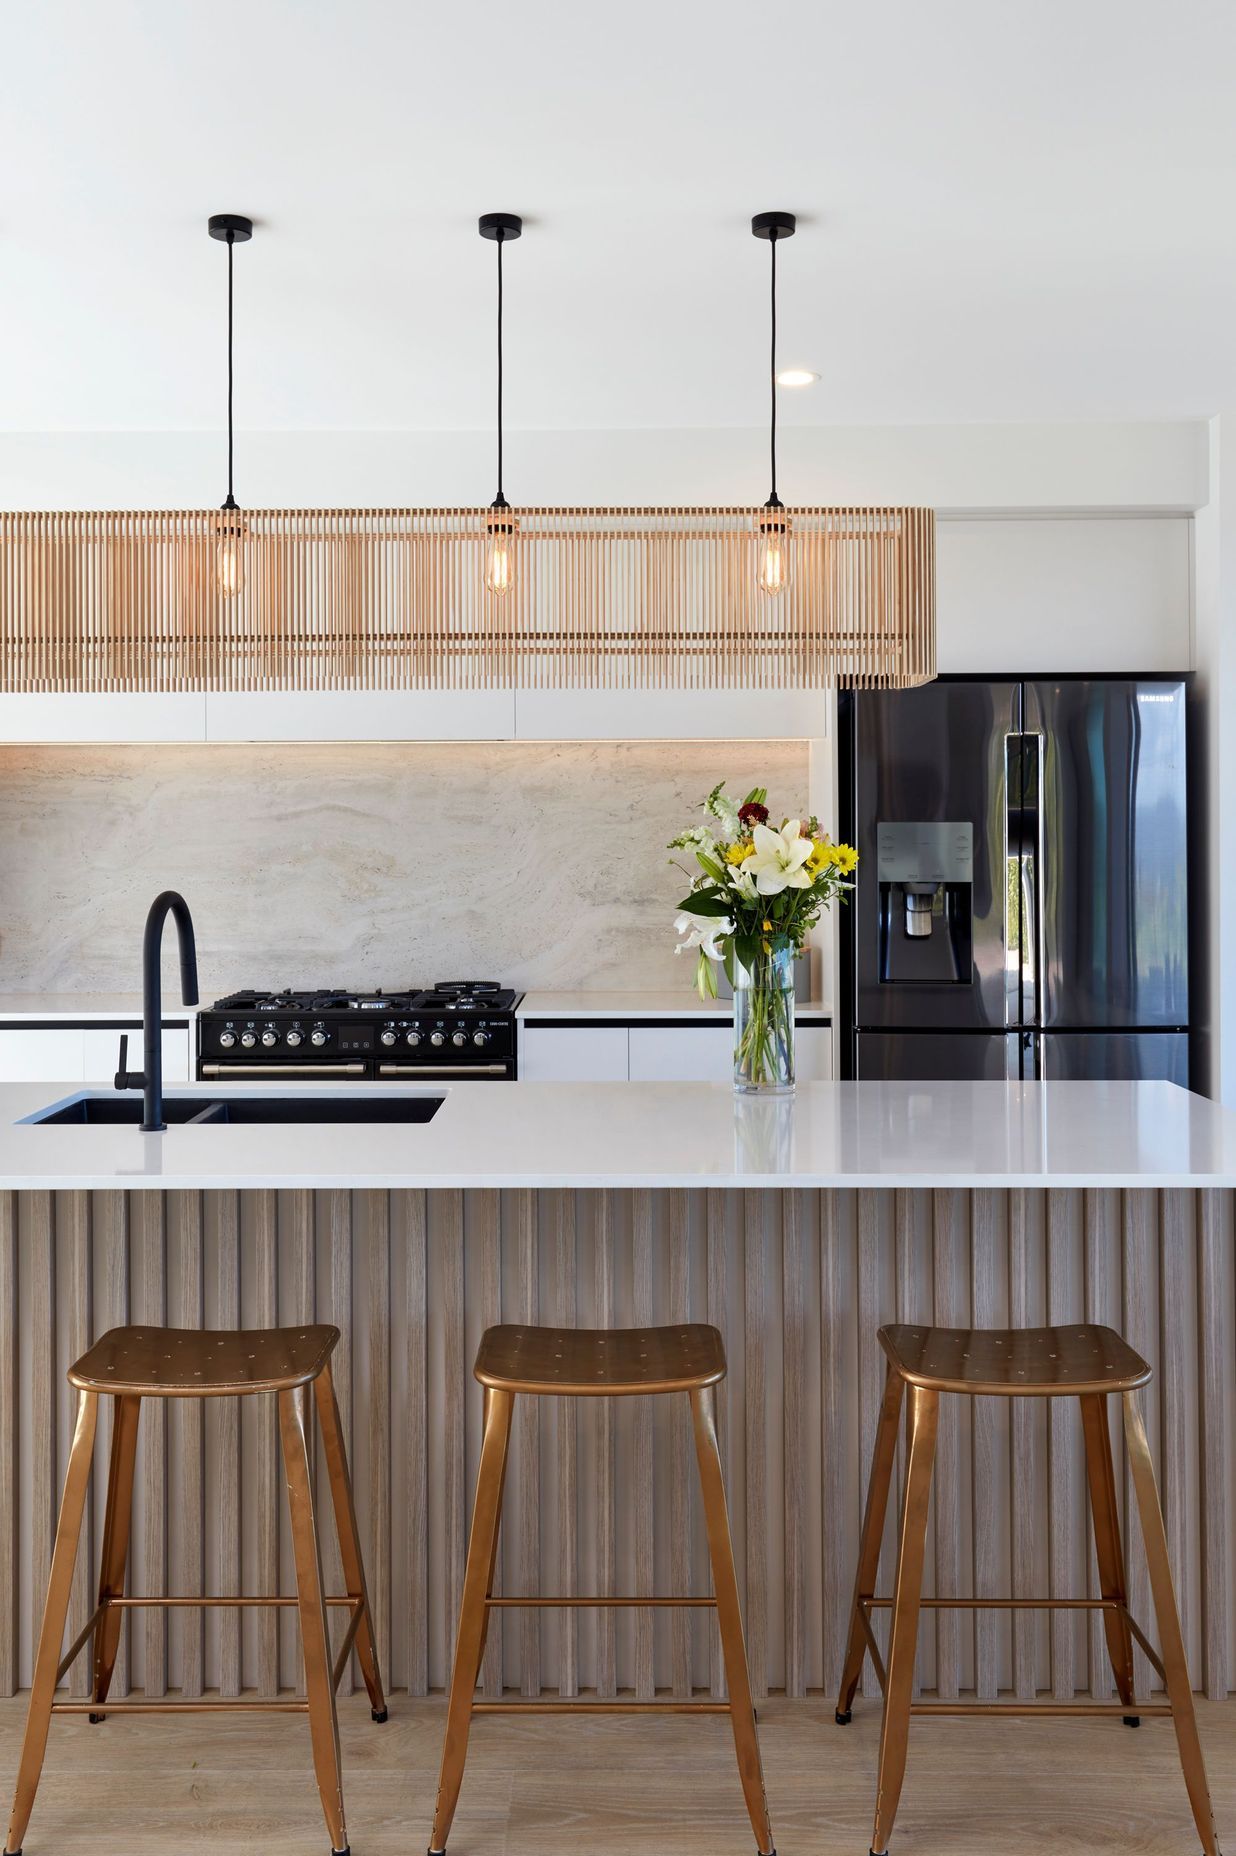 An i02 long rectangle shade follows the form of the kitchen island with its Silestone top and Decoform panelled front. The custom-designed splashback is a single large-format tile from Tile Space.